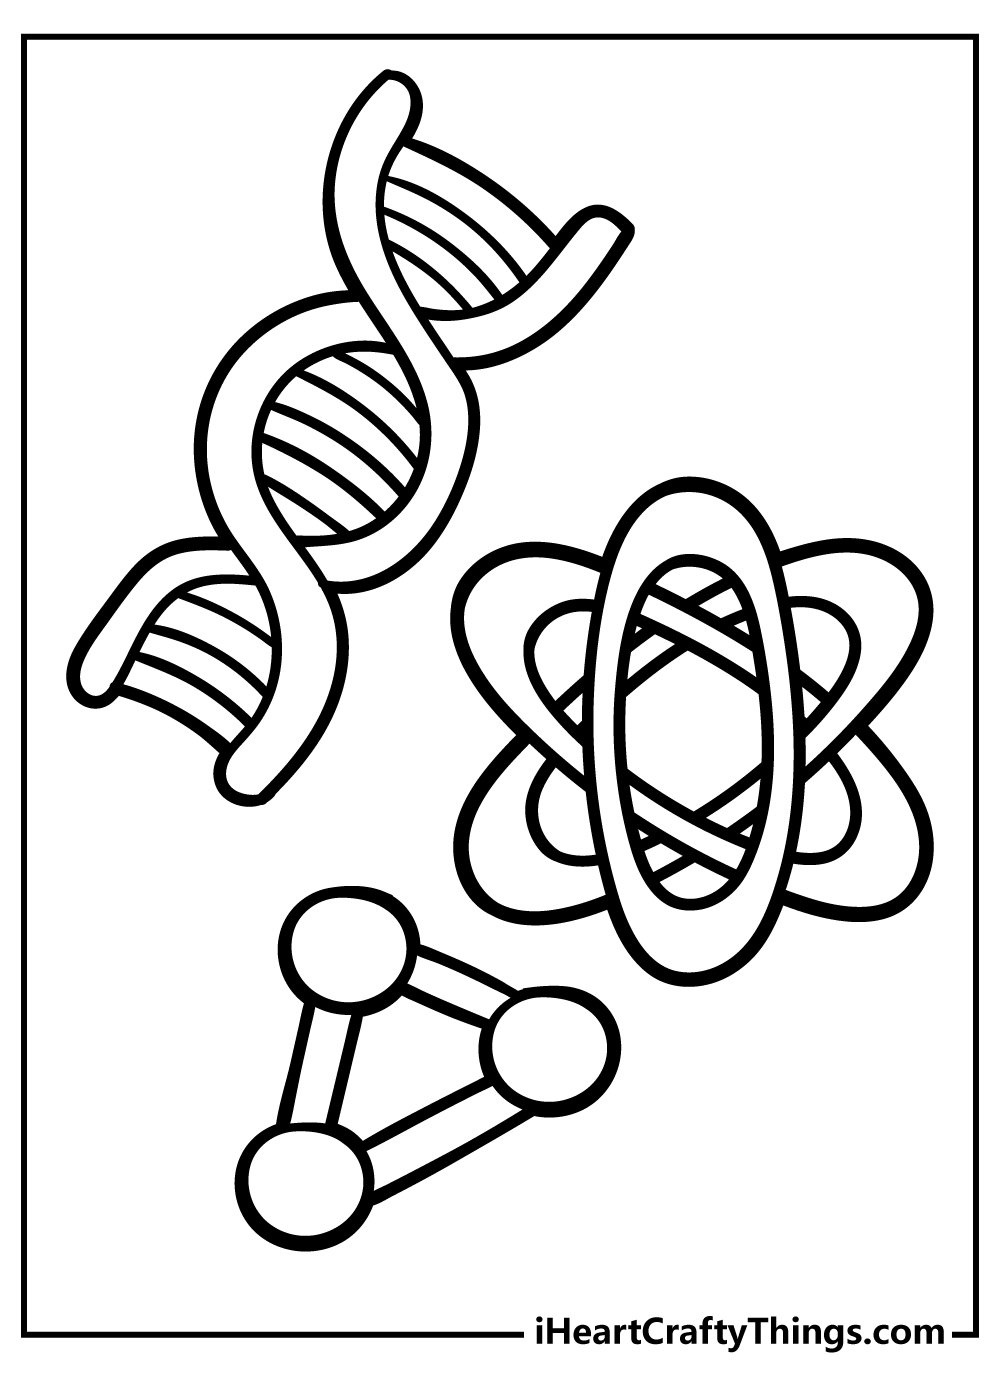 Science Coloring Pages for preschoolers free printable